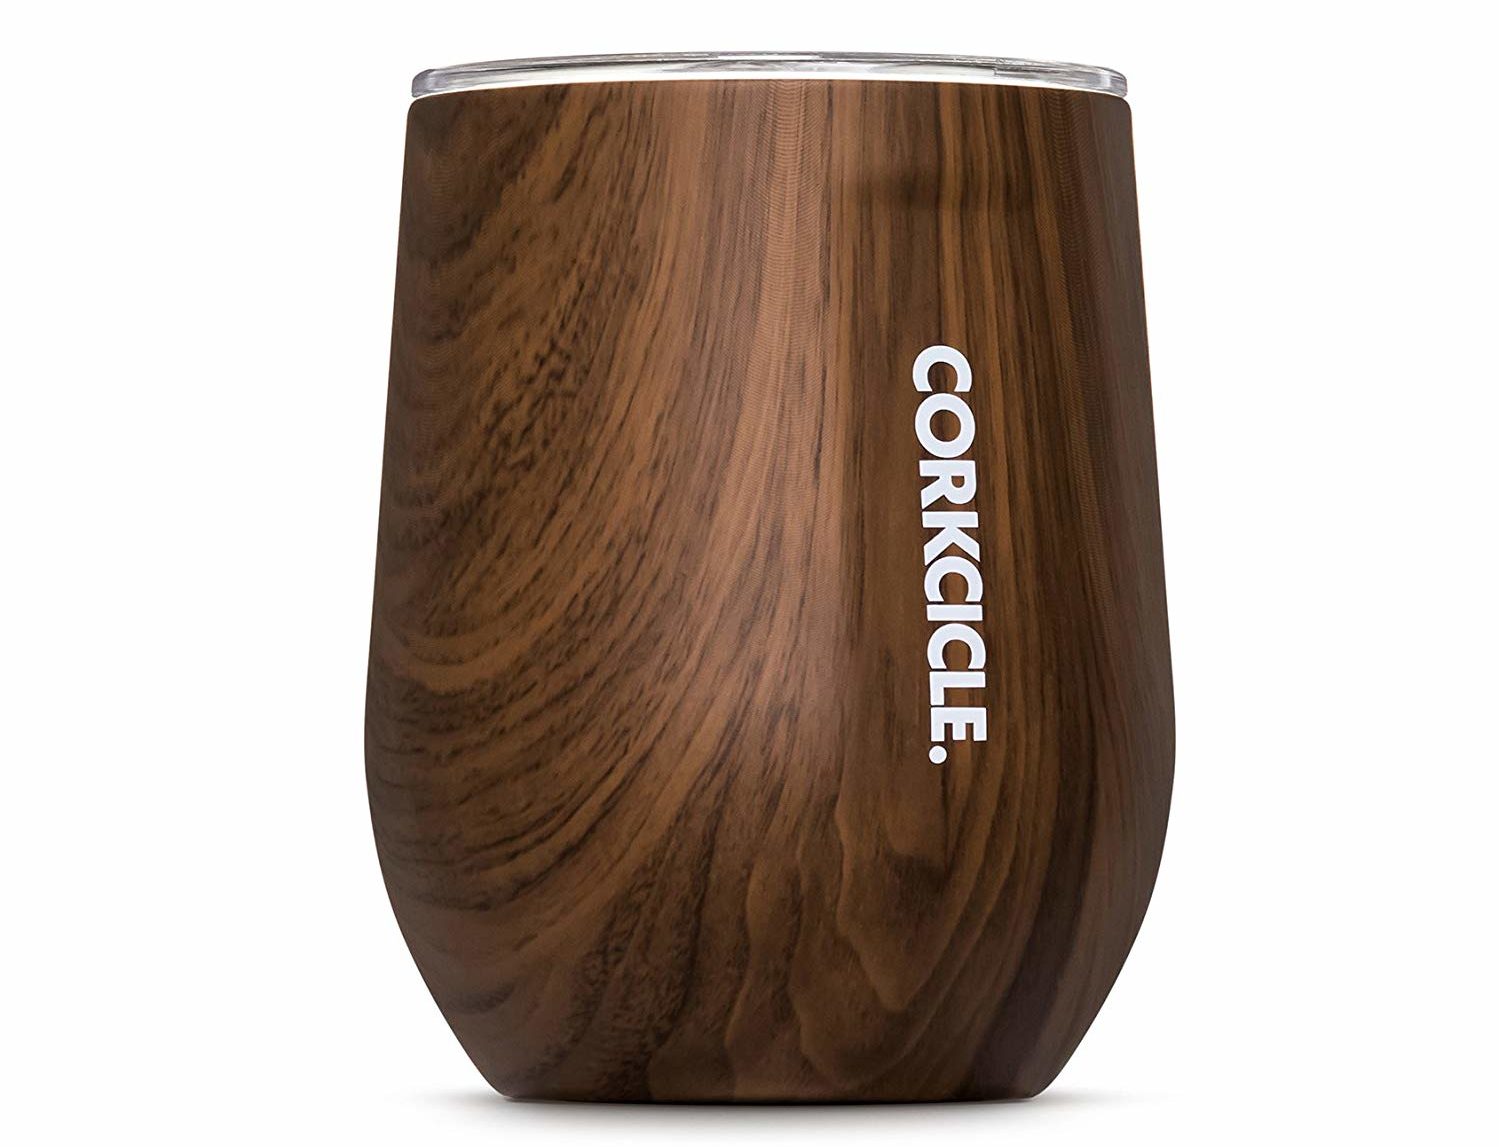 Best Gifts For Cousins 2022: Wooden Wine Glass Male Cousin 2022